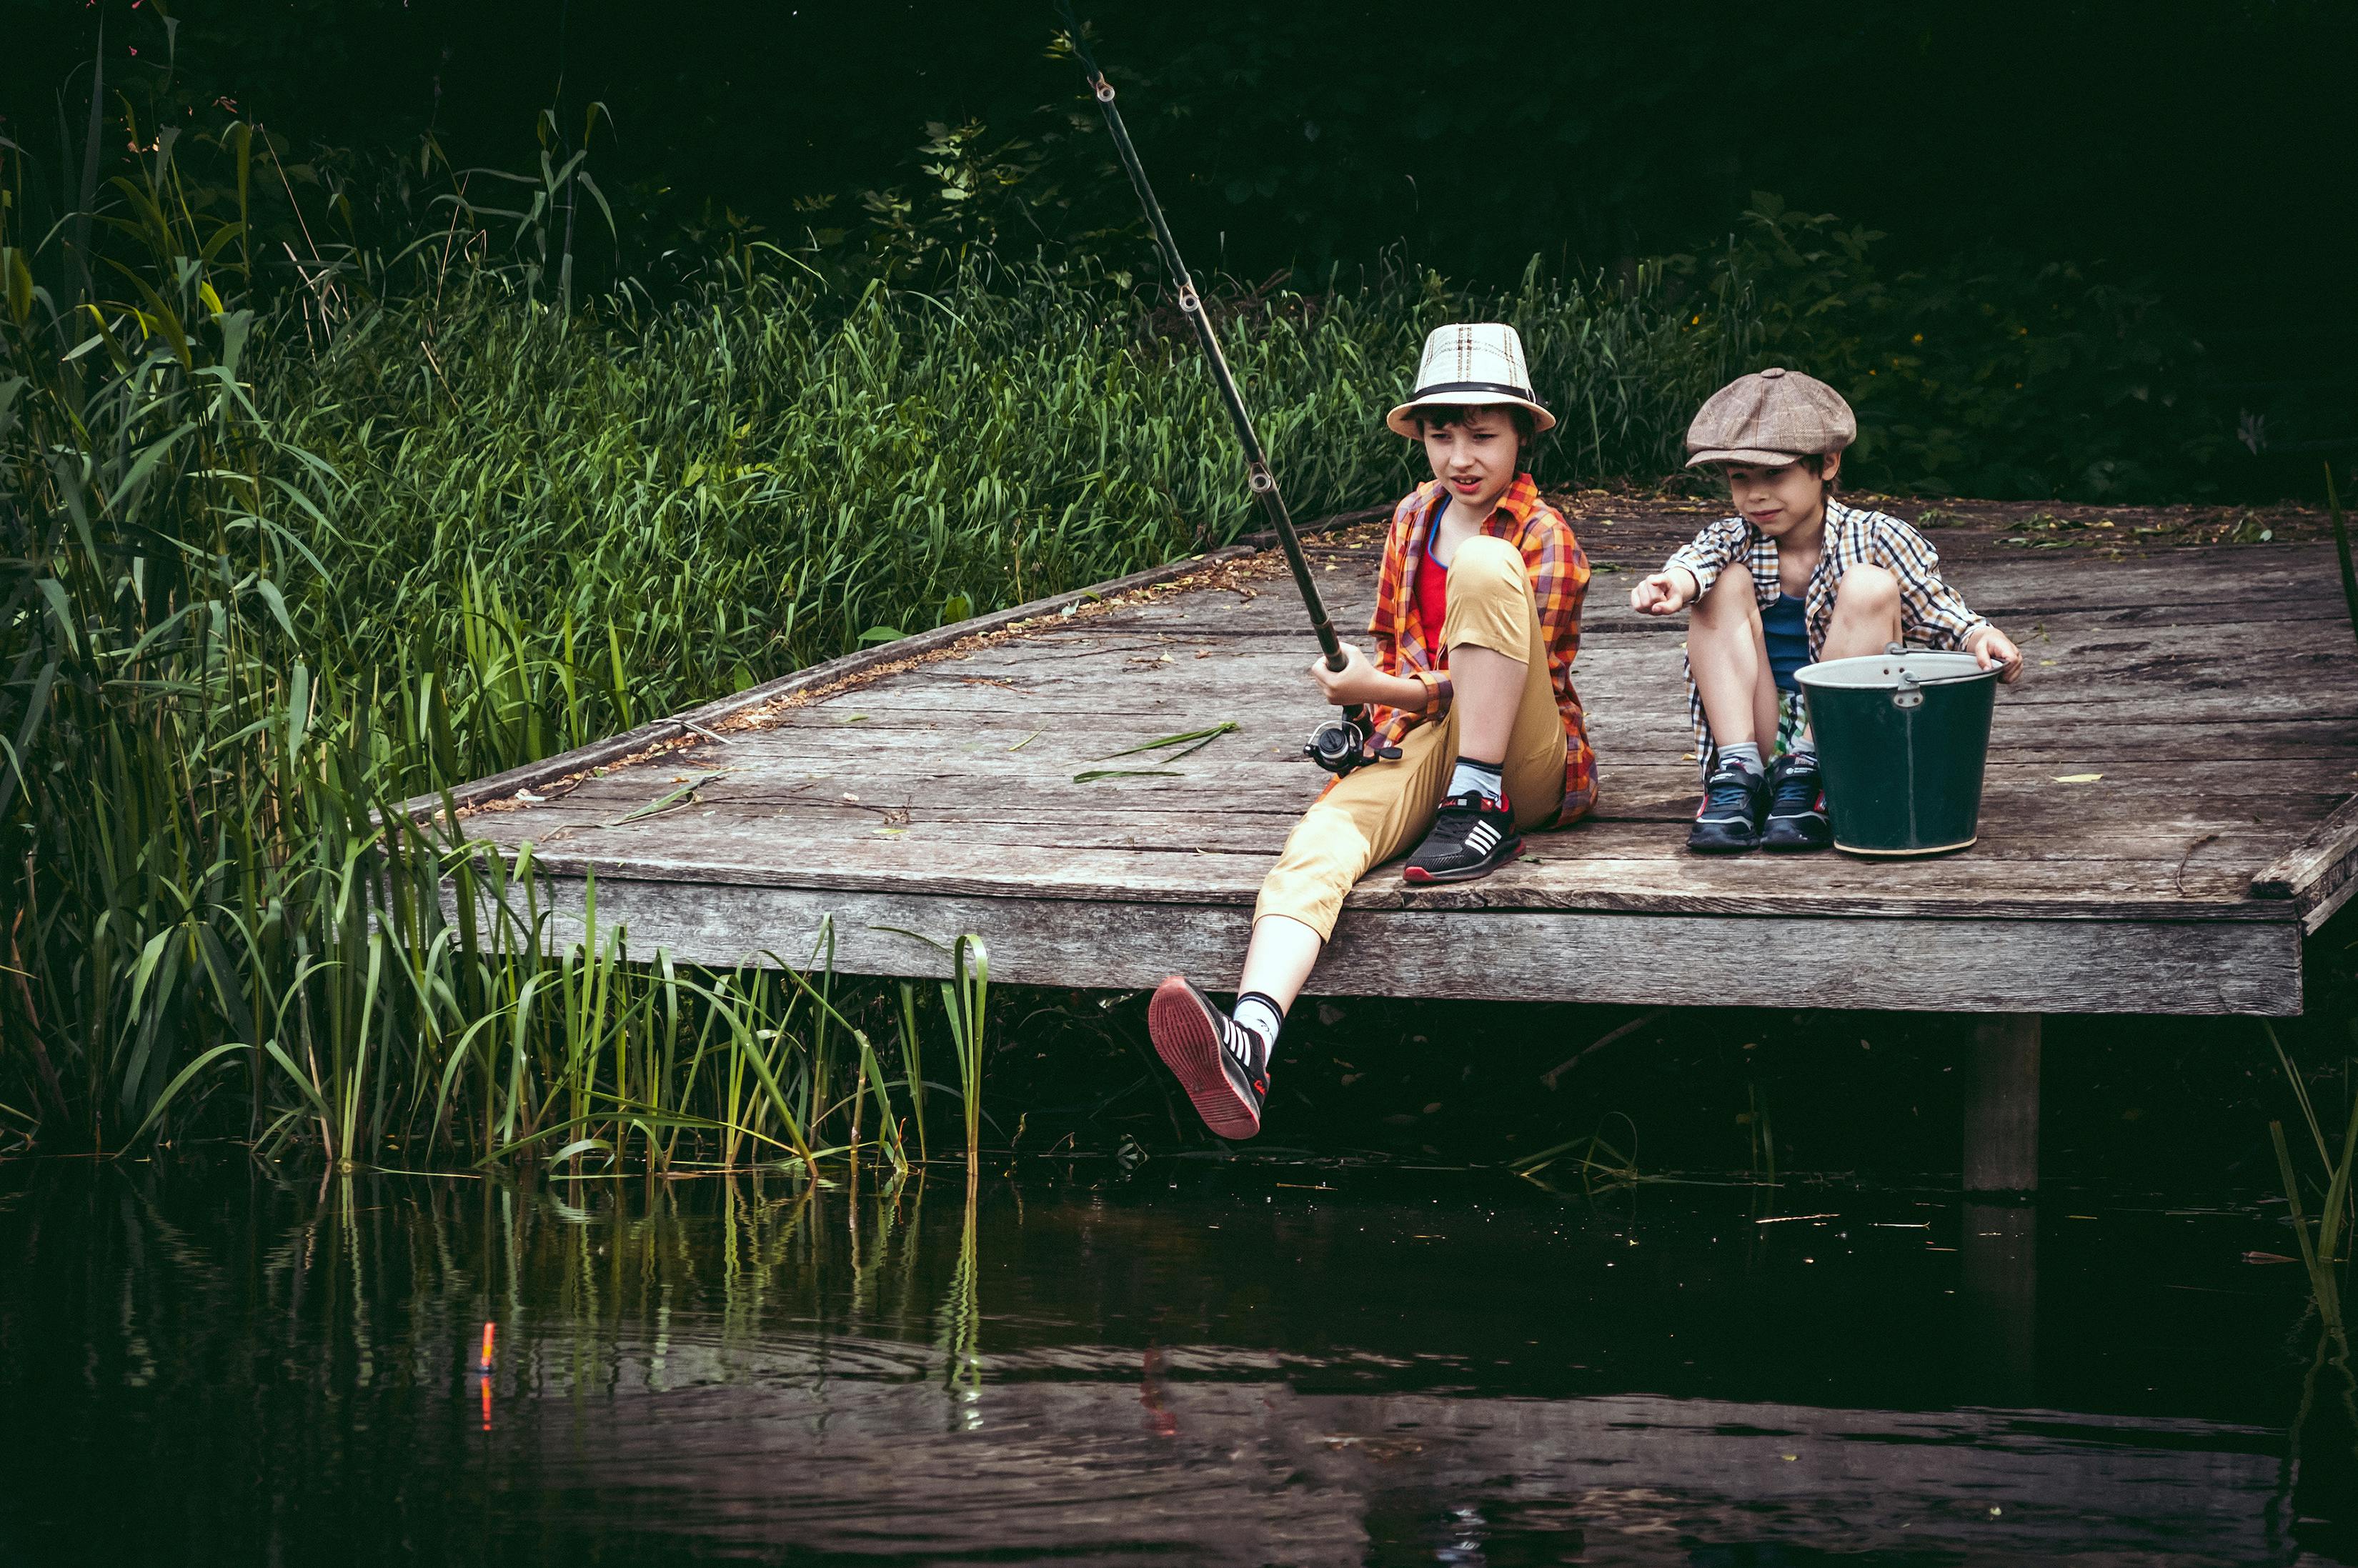 Boys Fishing from a Wooden Deck · Free Stock Photo